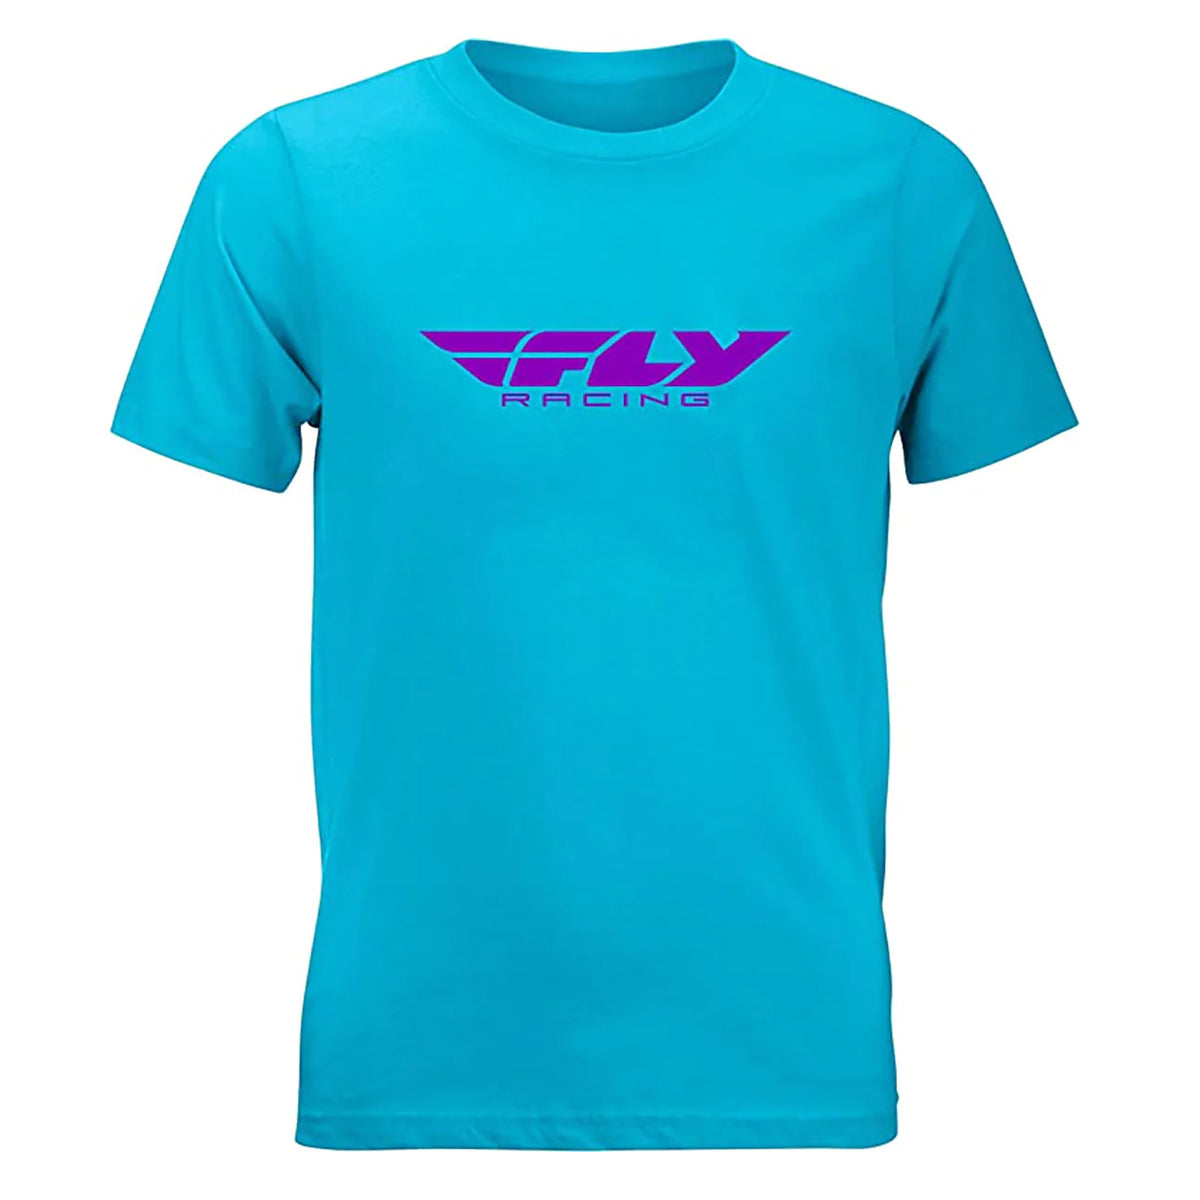 Fly Racing Corporate Youth Boys Short-Sleeve Shirts